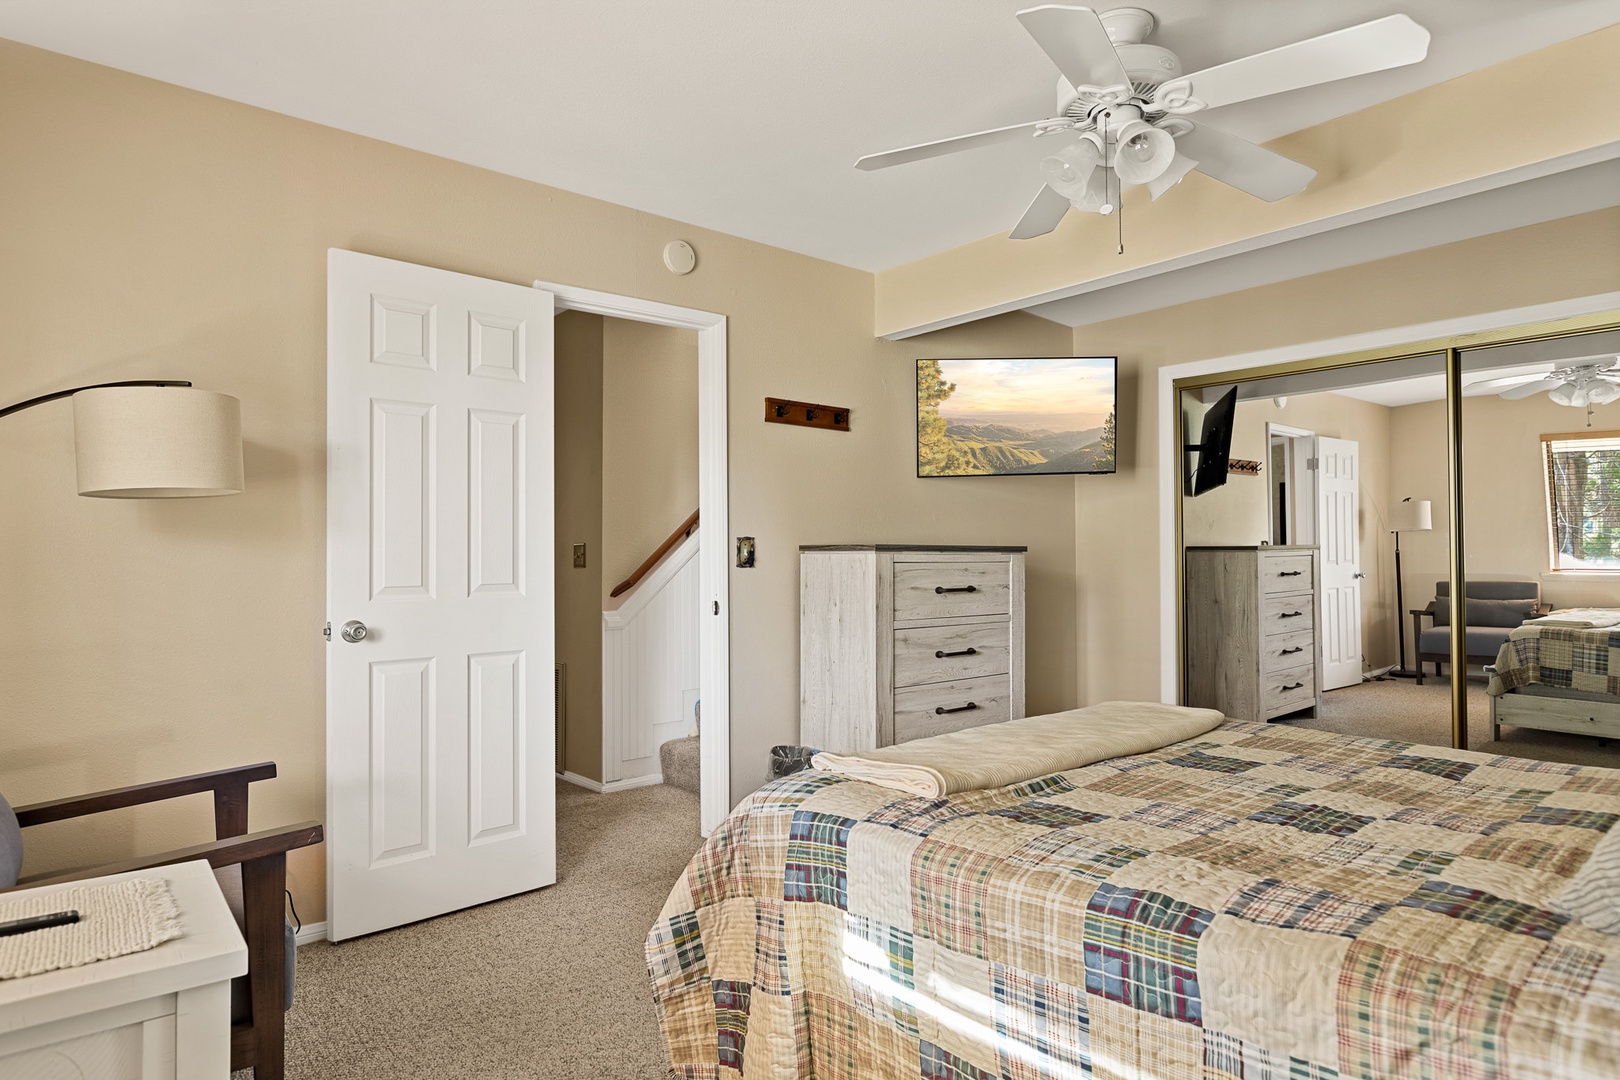 The 1st of two bedroom offers a queen bed, ceiling fan, & plenty of space